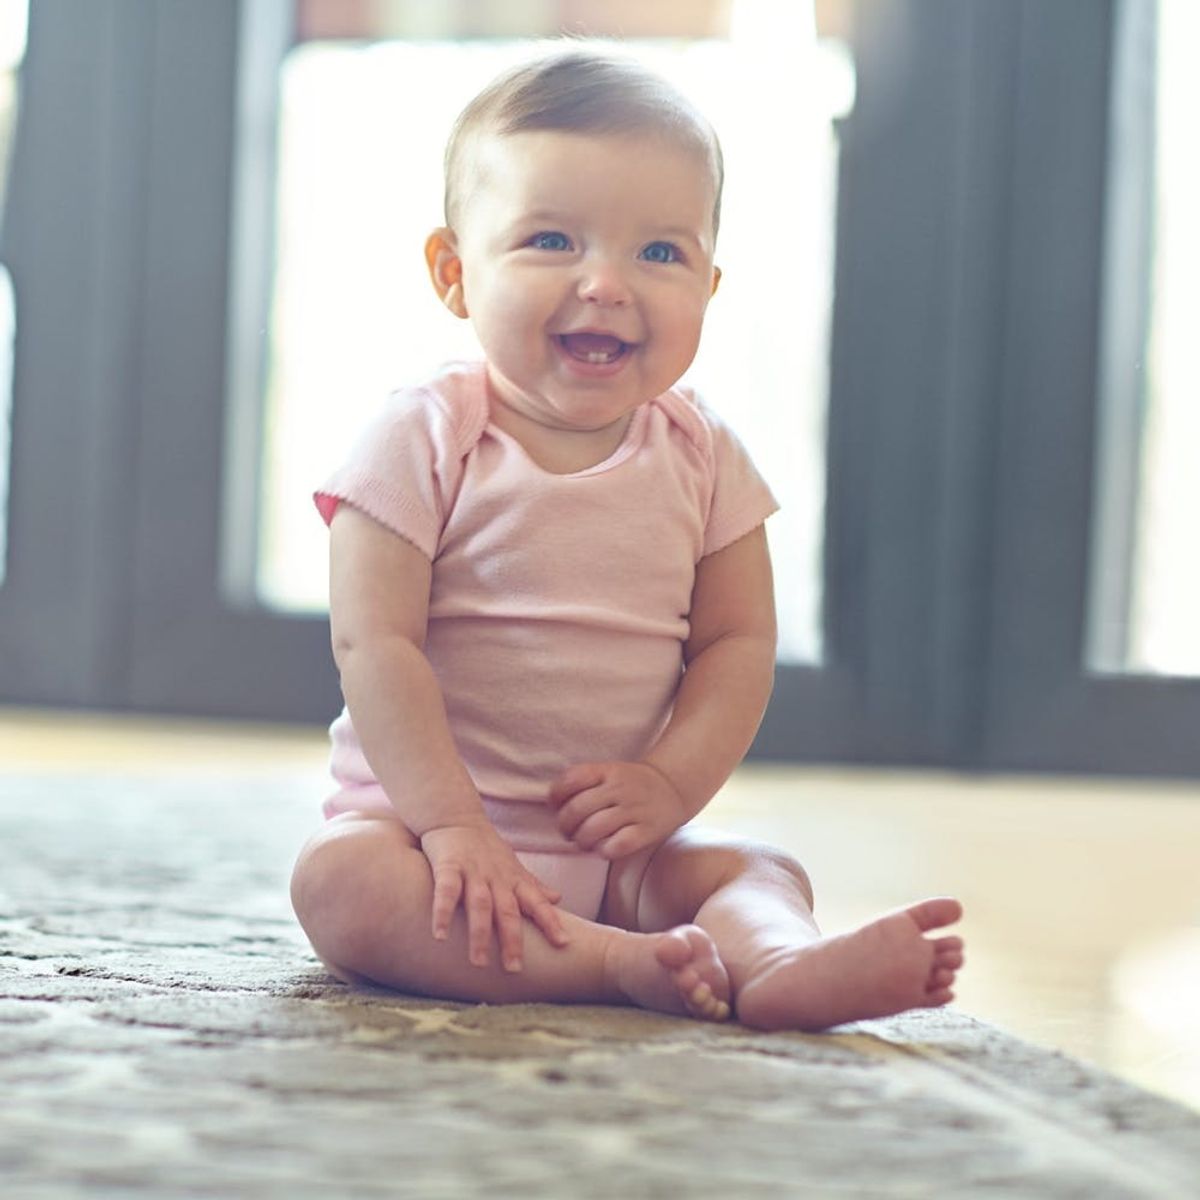 10 Fierce Baby Names for Your Little Scorpio